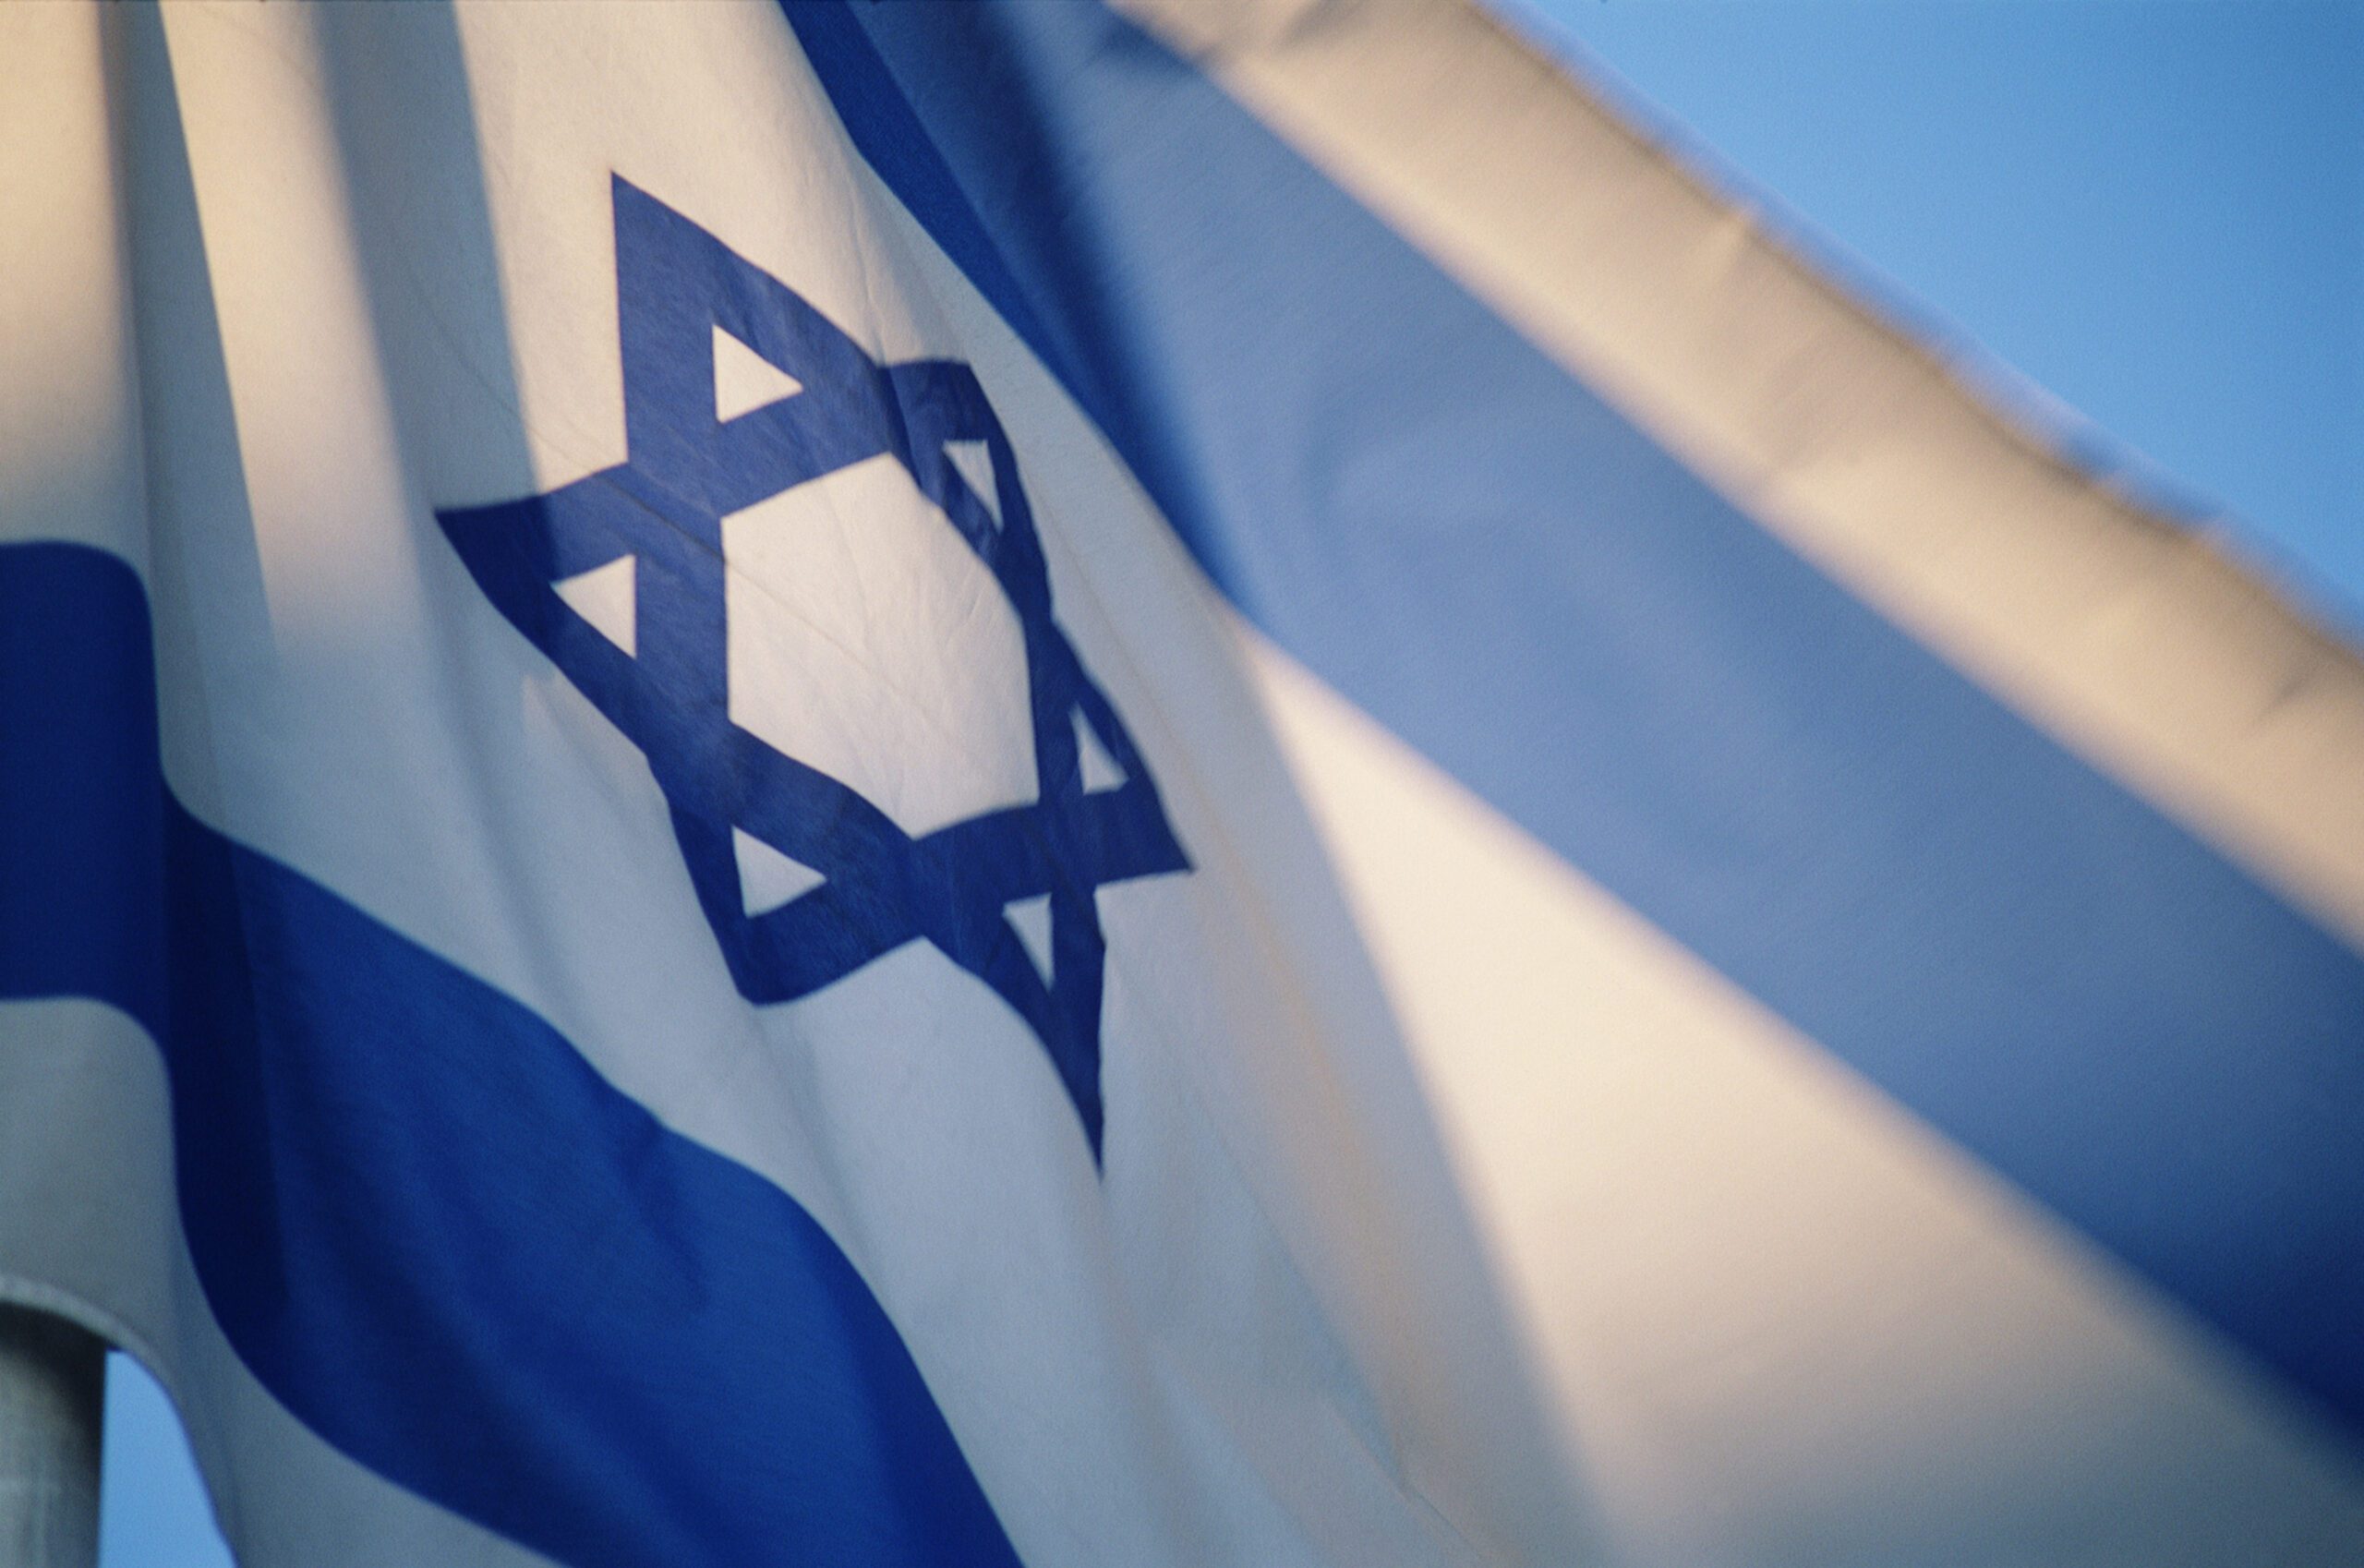 Flag of Israel with Star of David emblem, low angle view